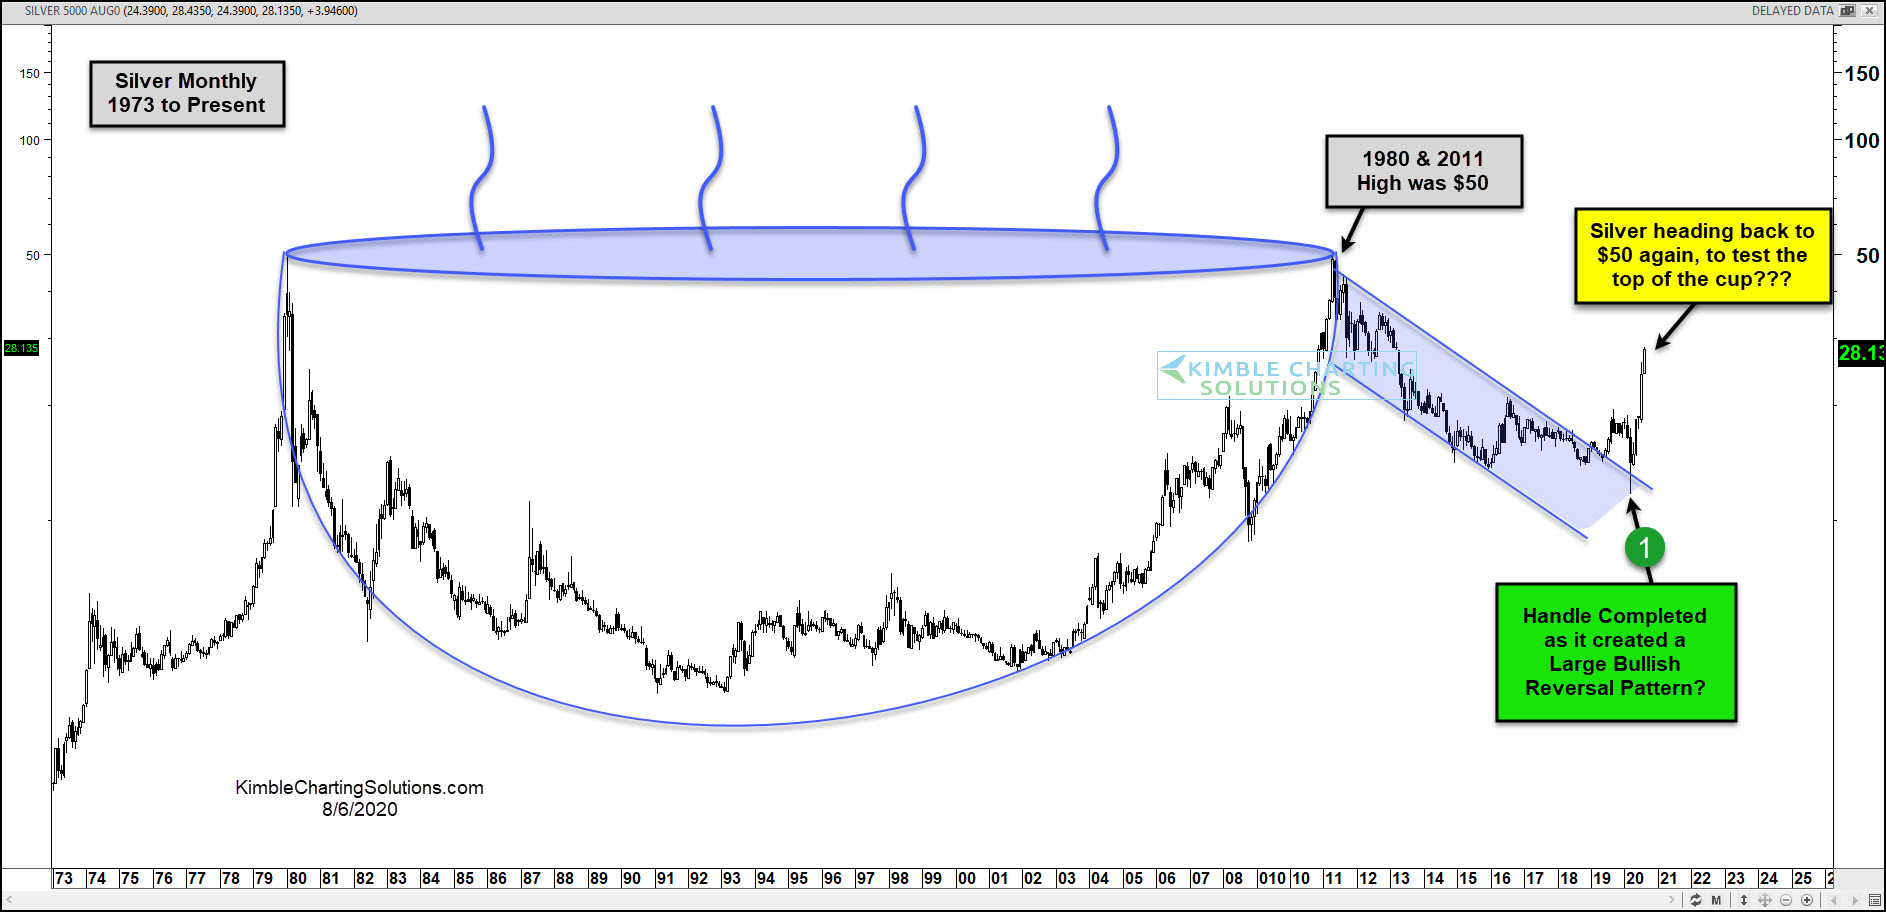 https://kimblechartingsolutions.com/wp-content/uploads/2020/08/silver-long-term-cup-and-handle-potential-heading-back-to-50-aug-6-2.jpg